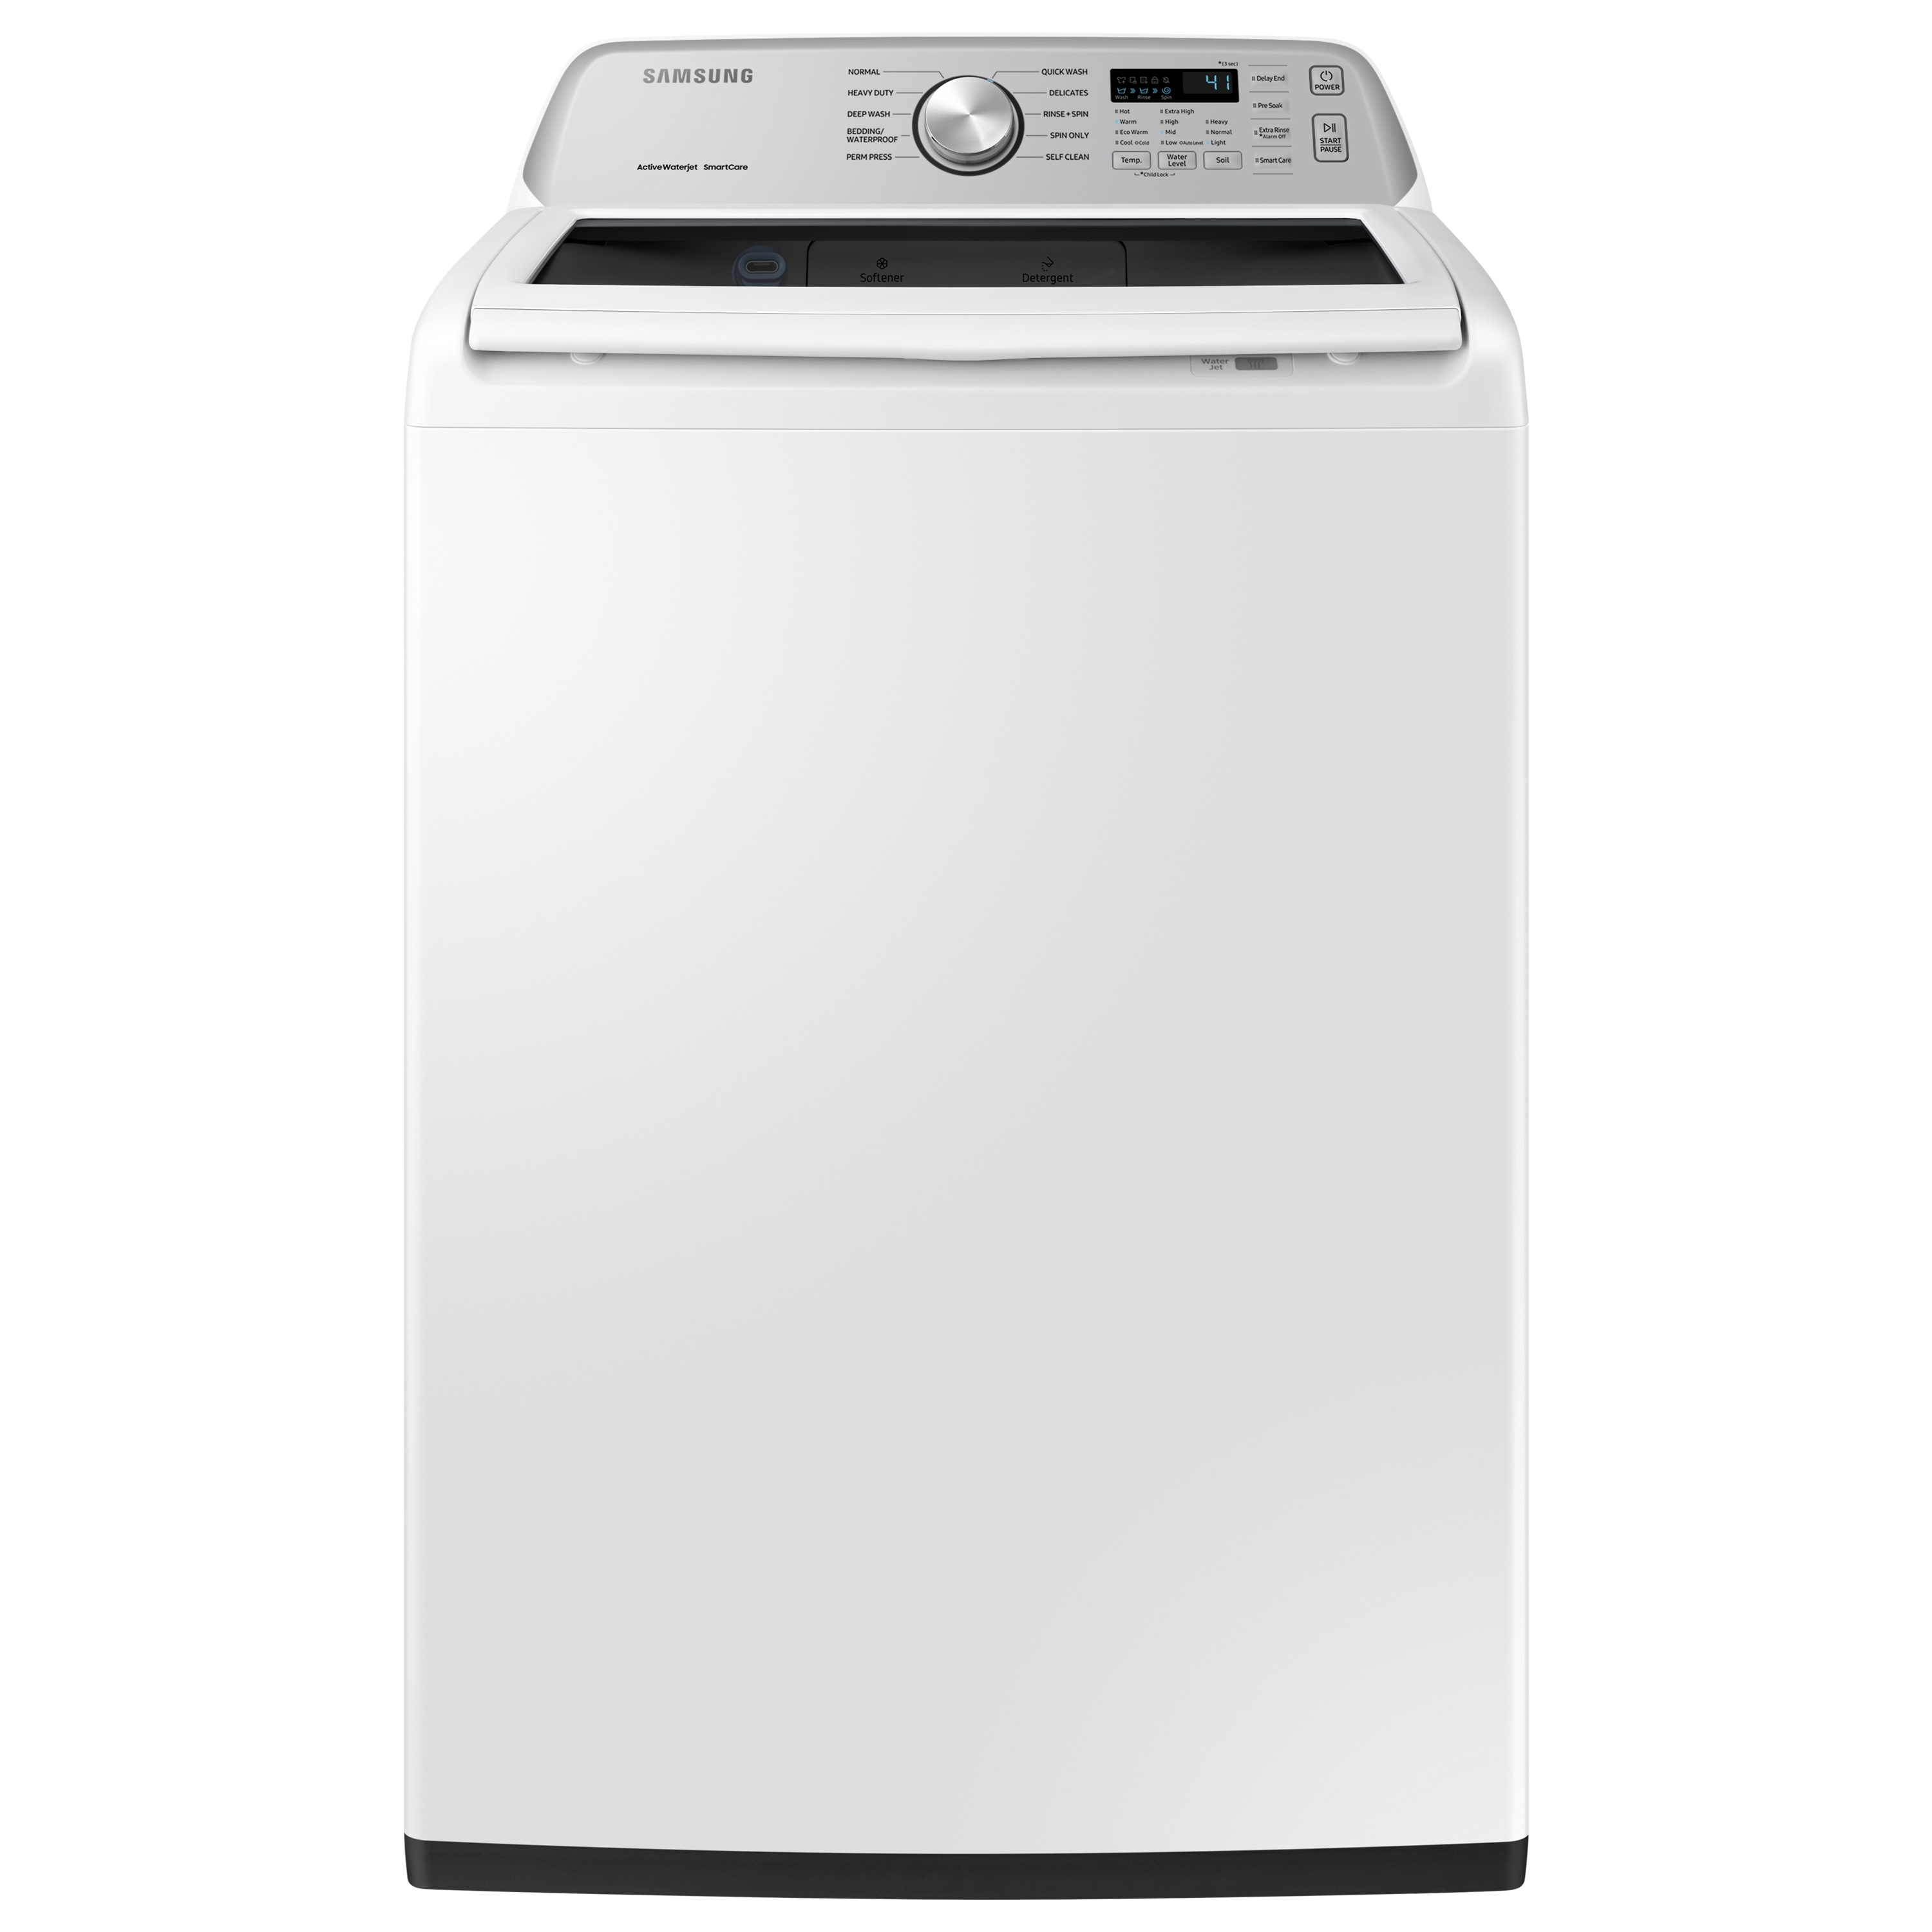 Photos - Washing Machine Samsung 4.5 cu. ft. Capacity Top Load Washer with Active WaterJet in White 